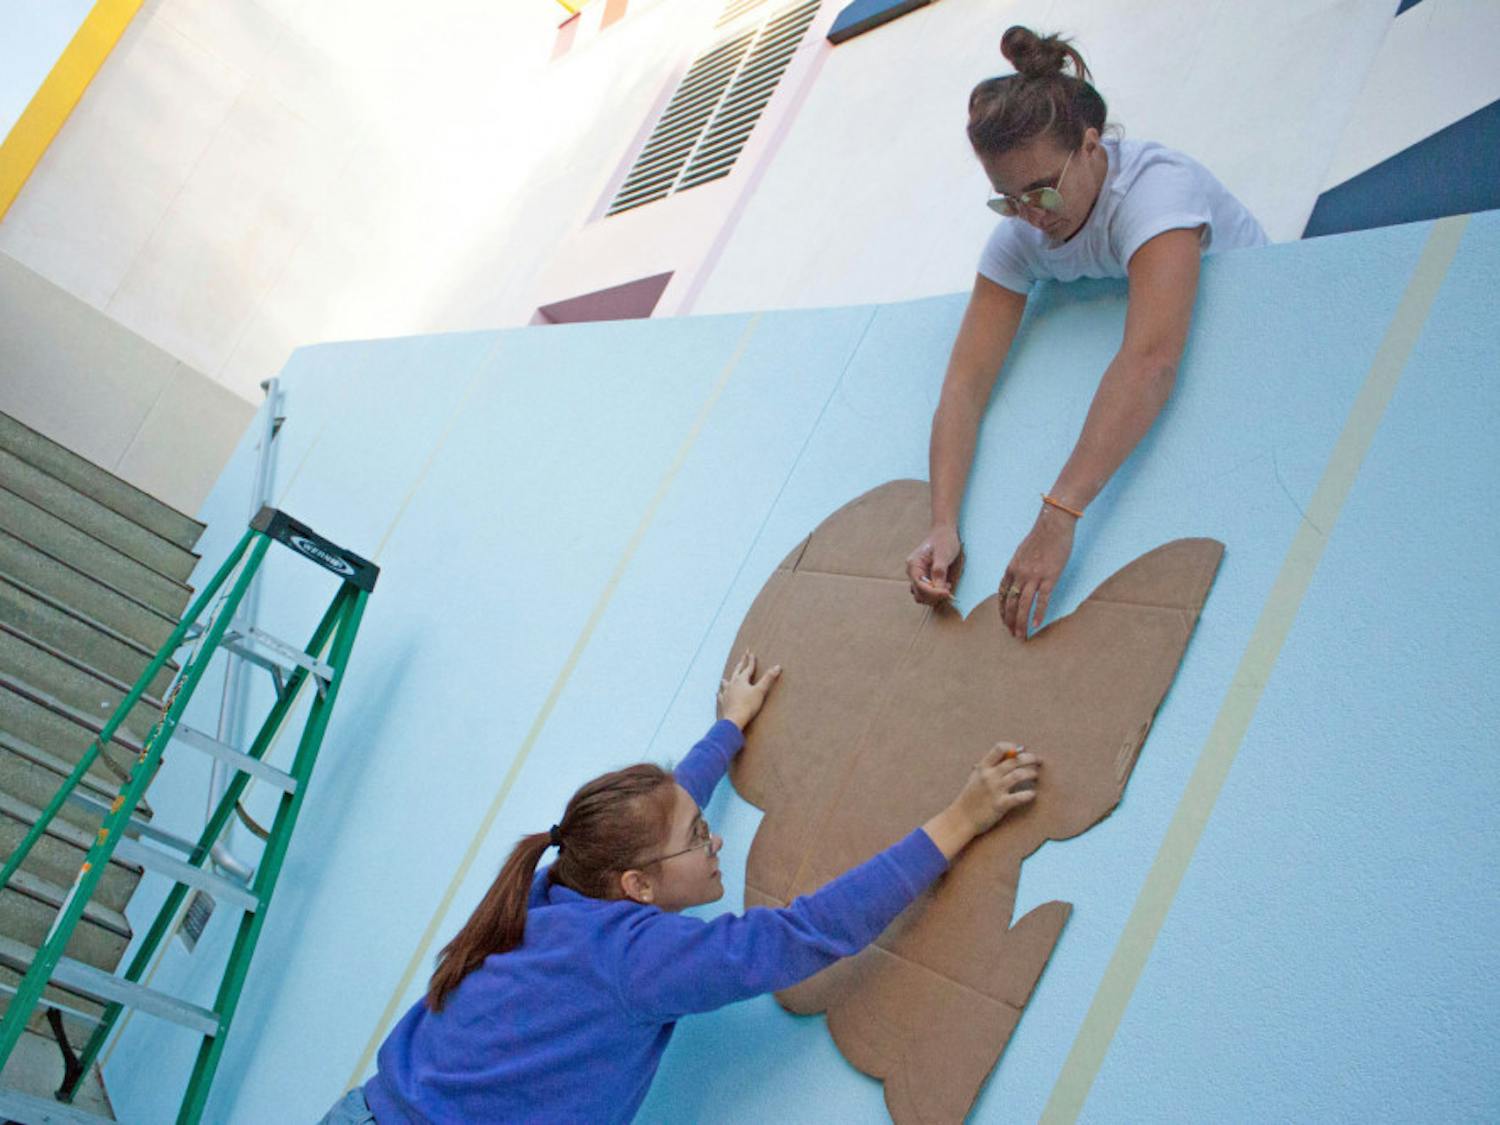 Kate Keskinen, a 27-year-old Santa Fe College employee, helps Jovana Christiani trace the design for Santa Fe’s new mural Tuesday. They helped a Dublin-based urban artist paint the mural.